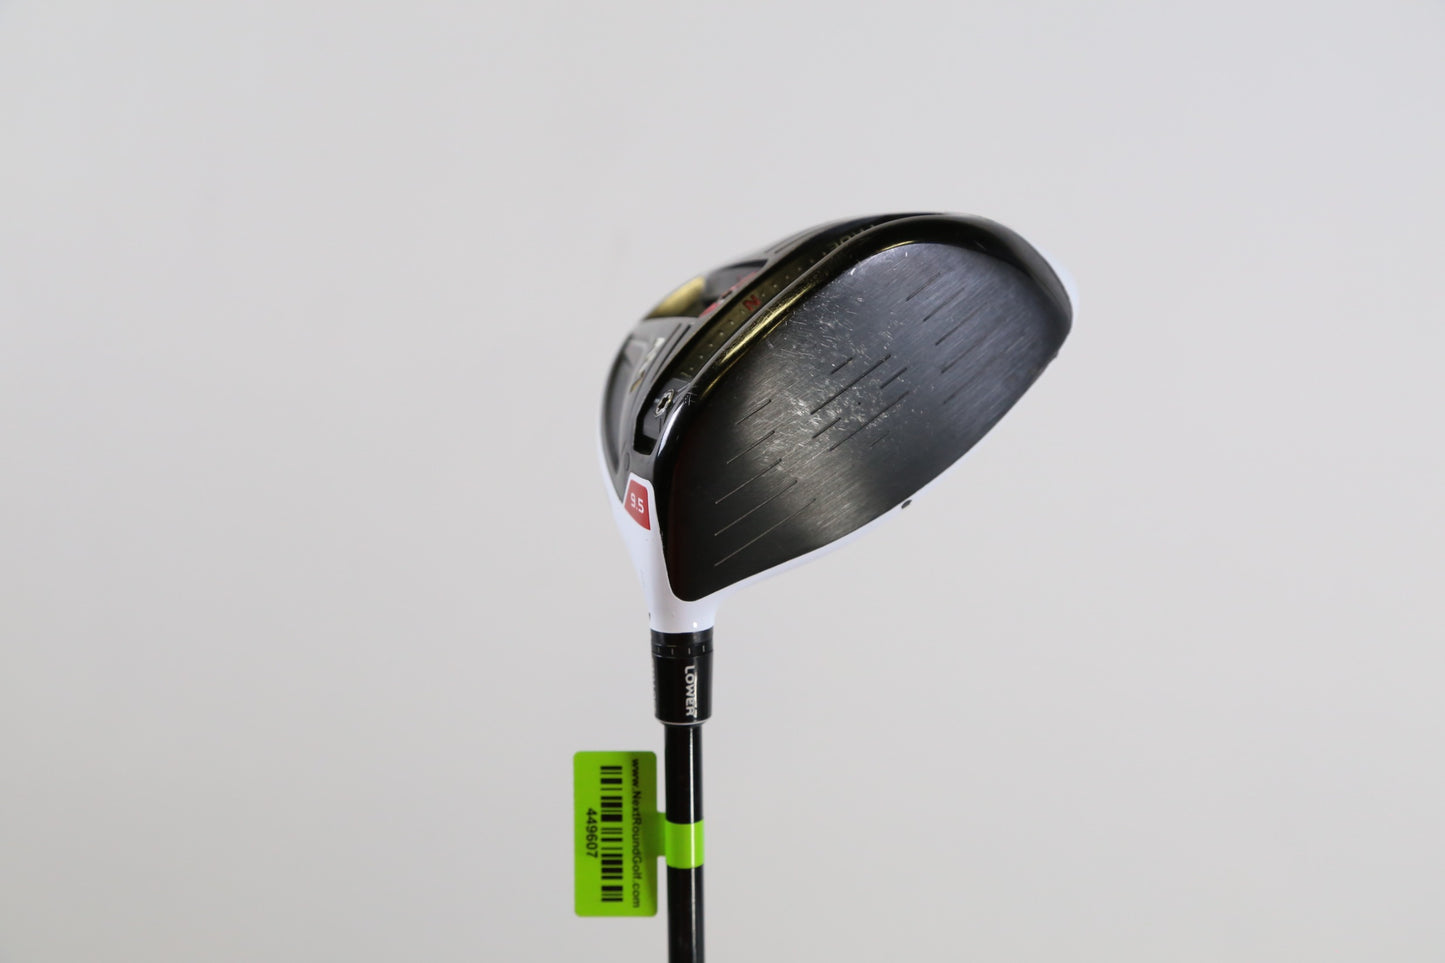 Used TaylorMade M1 Driver - Right-Handed - 9.5 Degrees - Stiff Flex